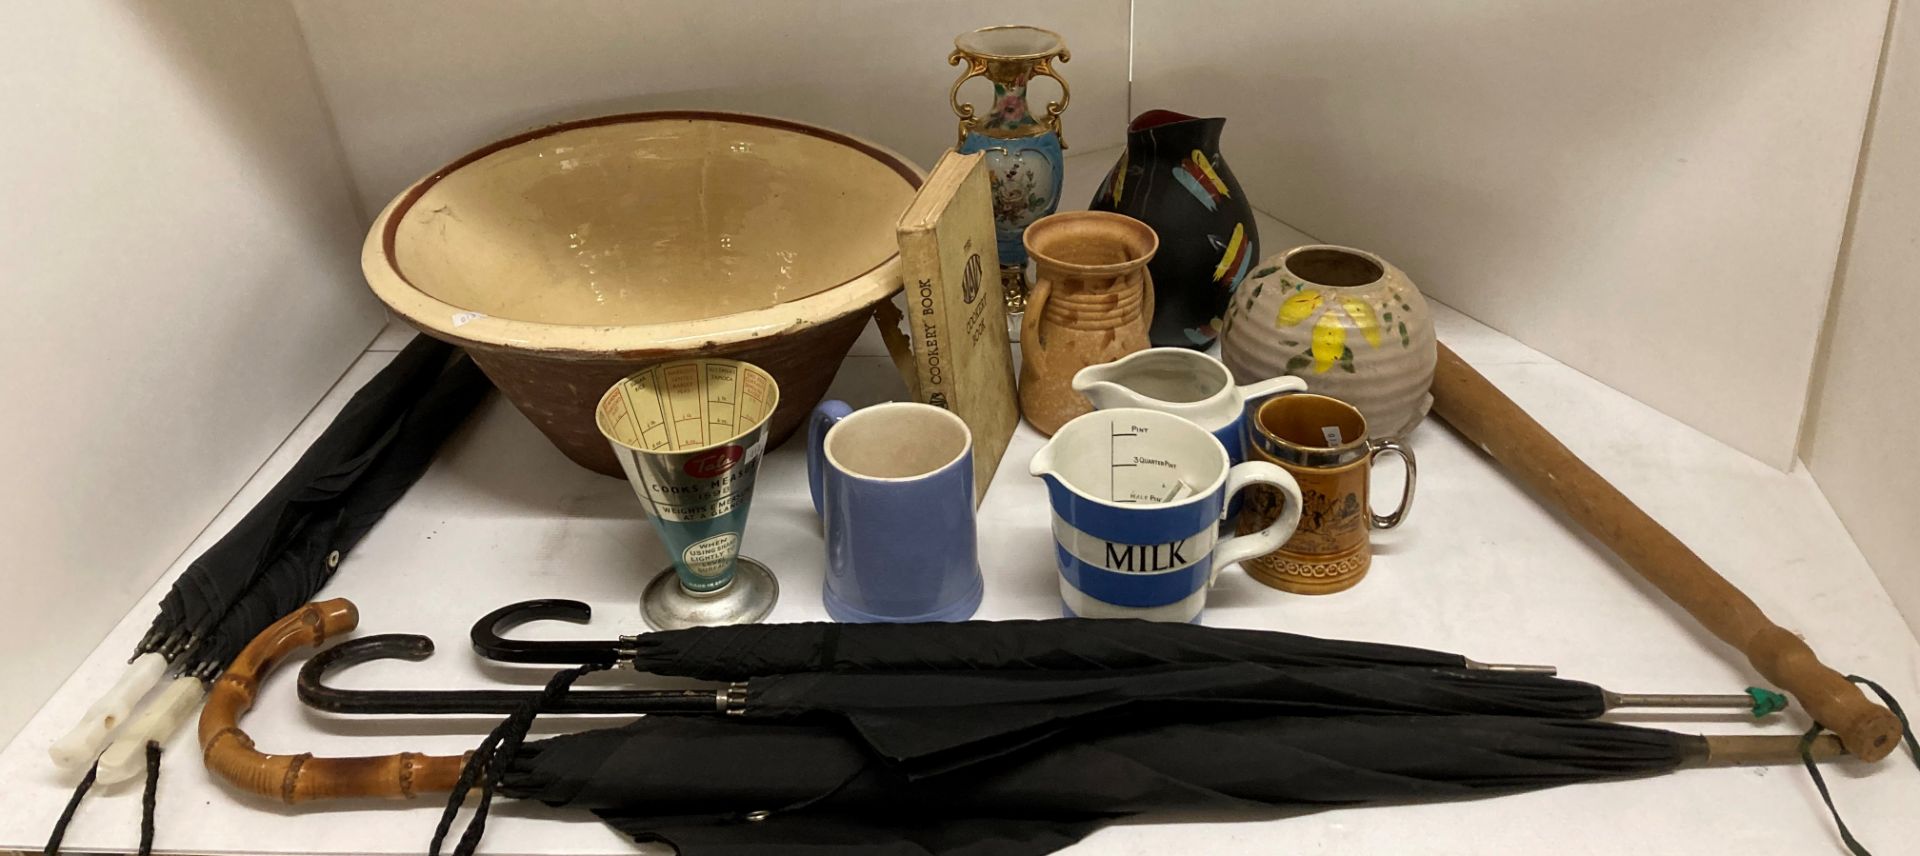 Remaining contents to rack - pancheon (with cracks), wood truncheon, parasols, Tala measuring jug,